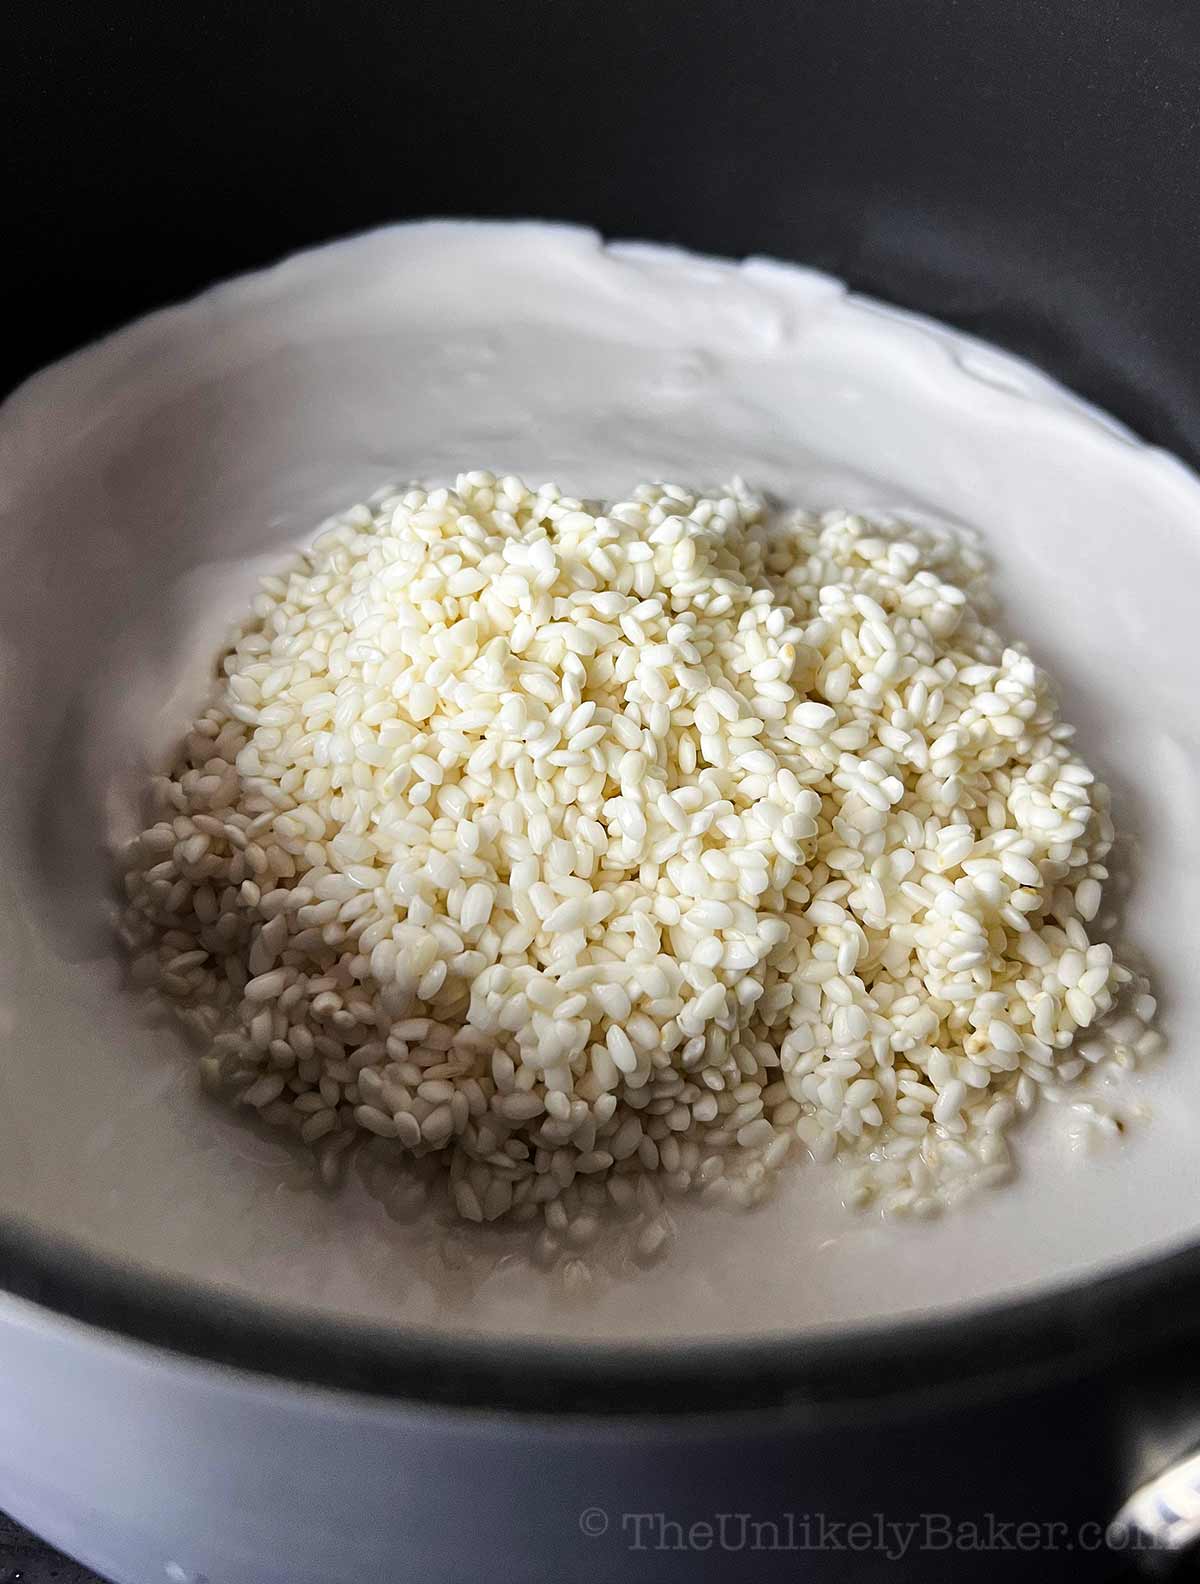 Glutinous rice combined with coconut milk in a saucepan.